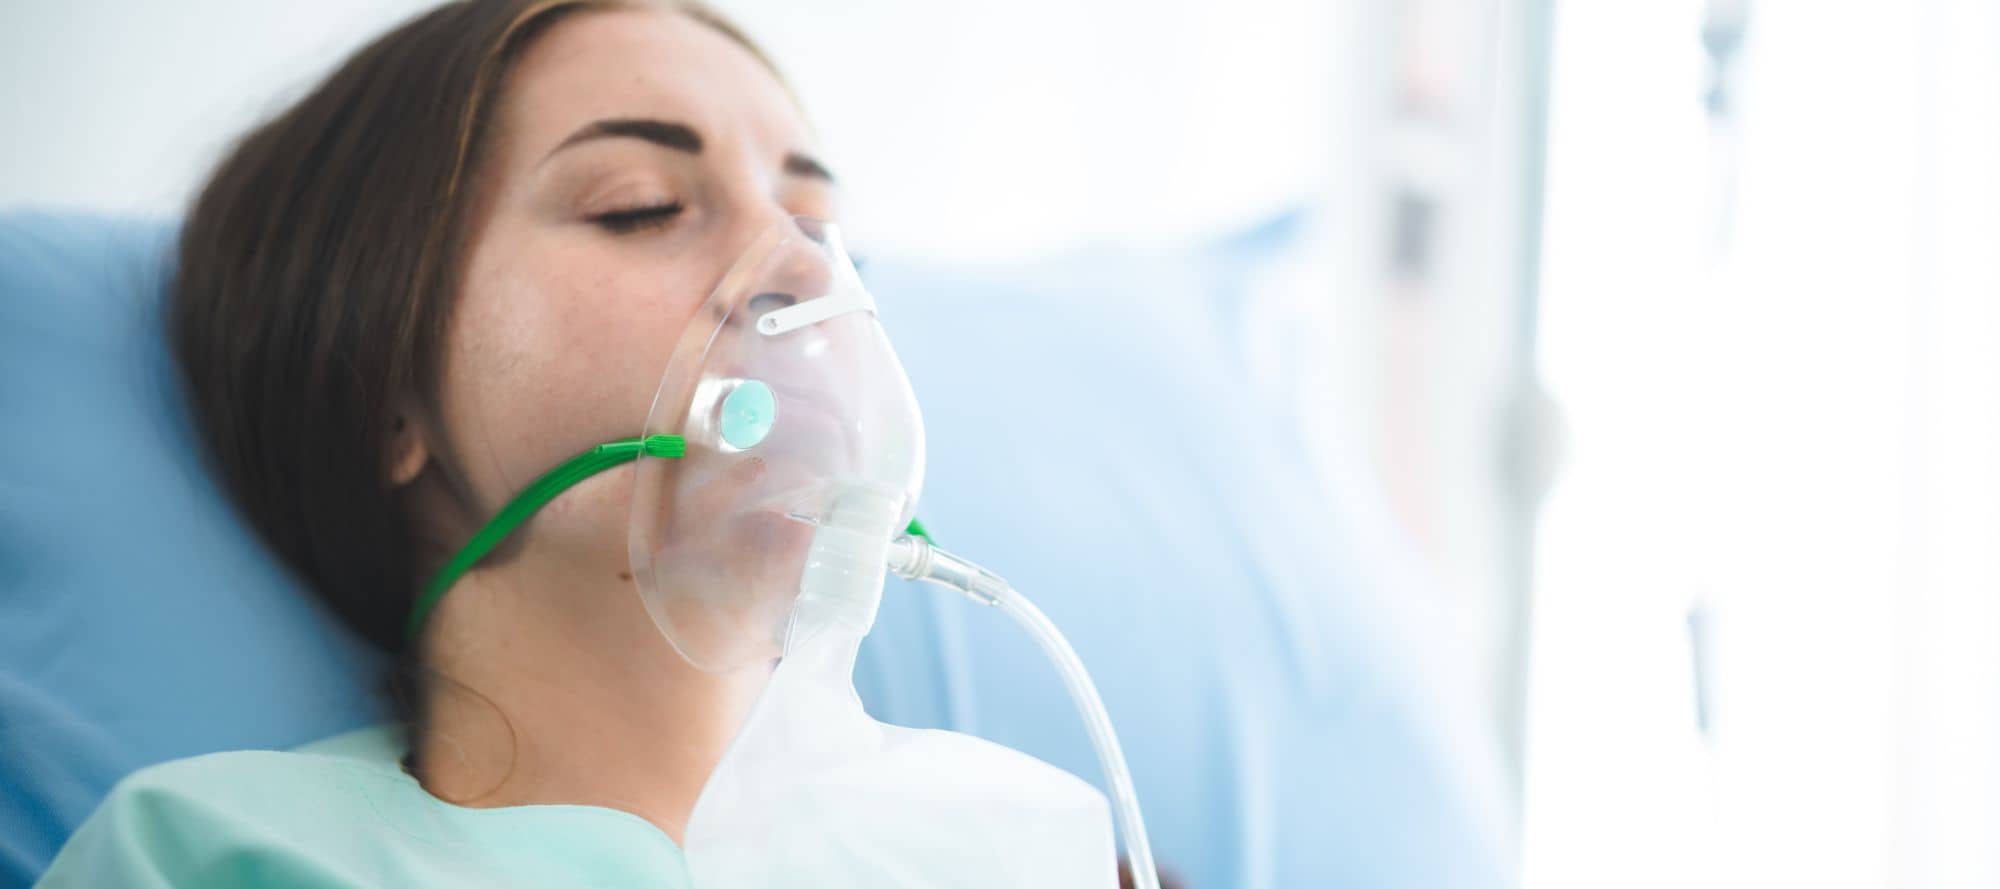 Young female patient wearing oxygen mask in hospital bed with her eyes closed